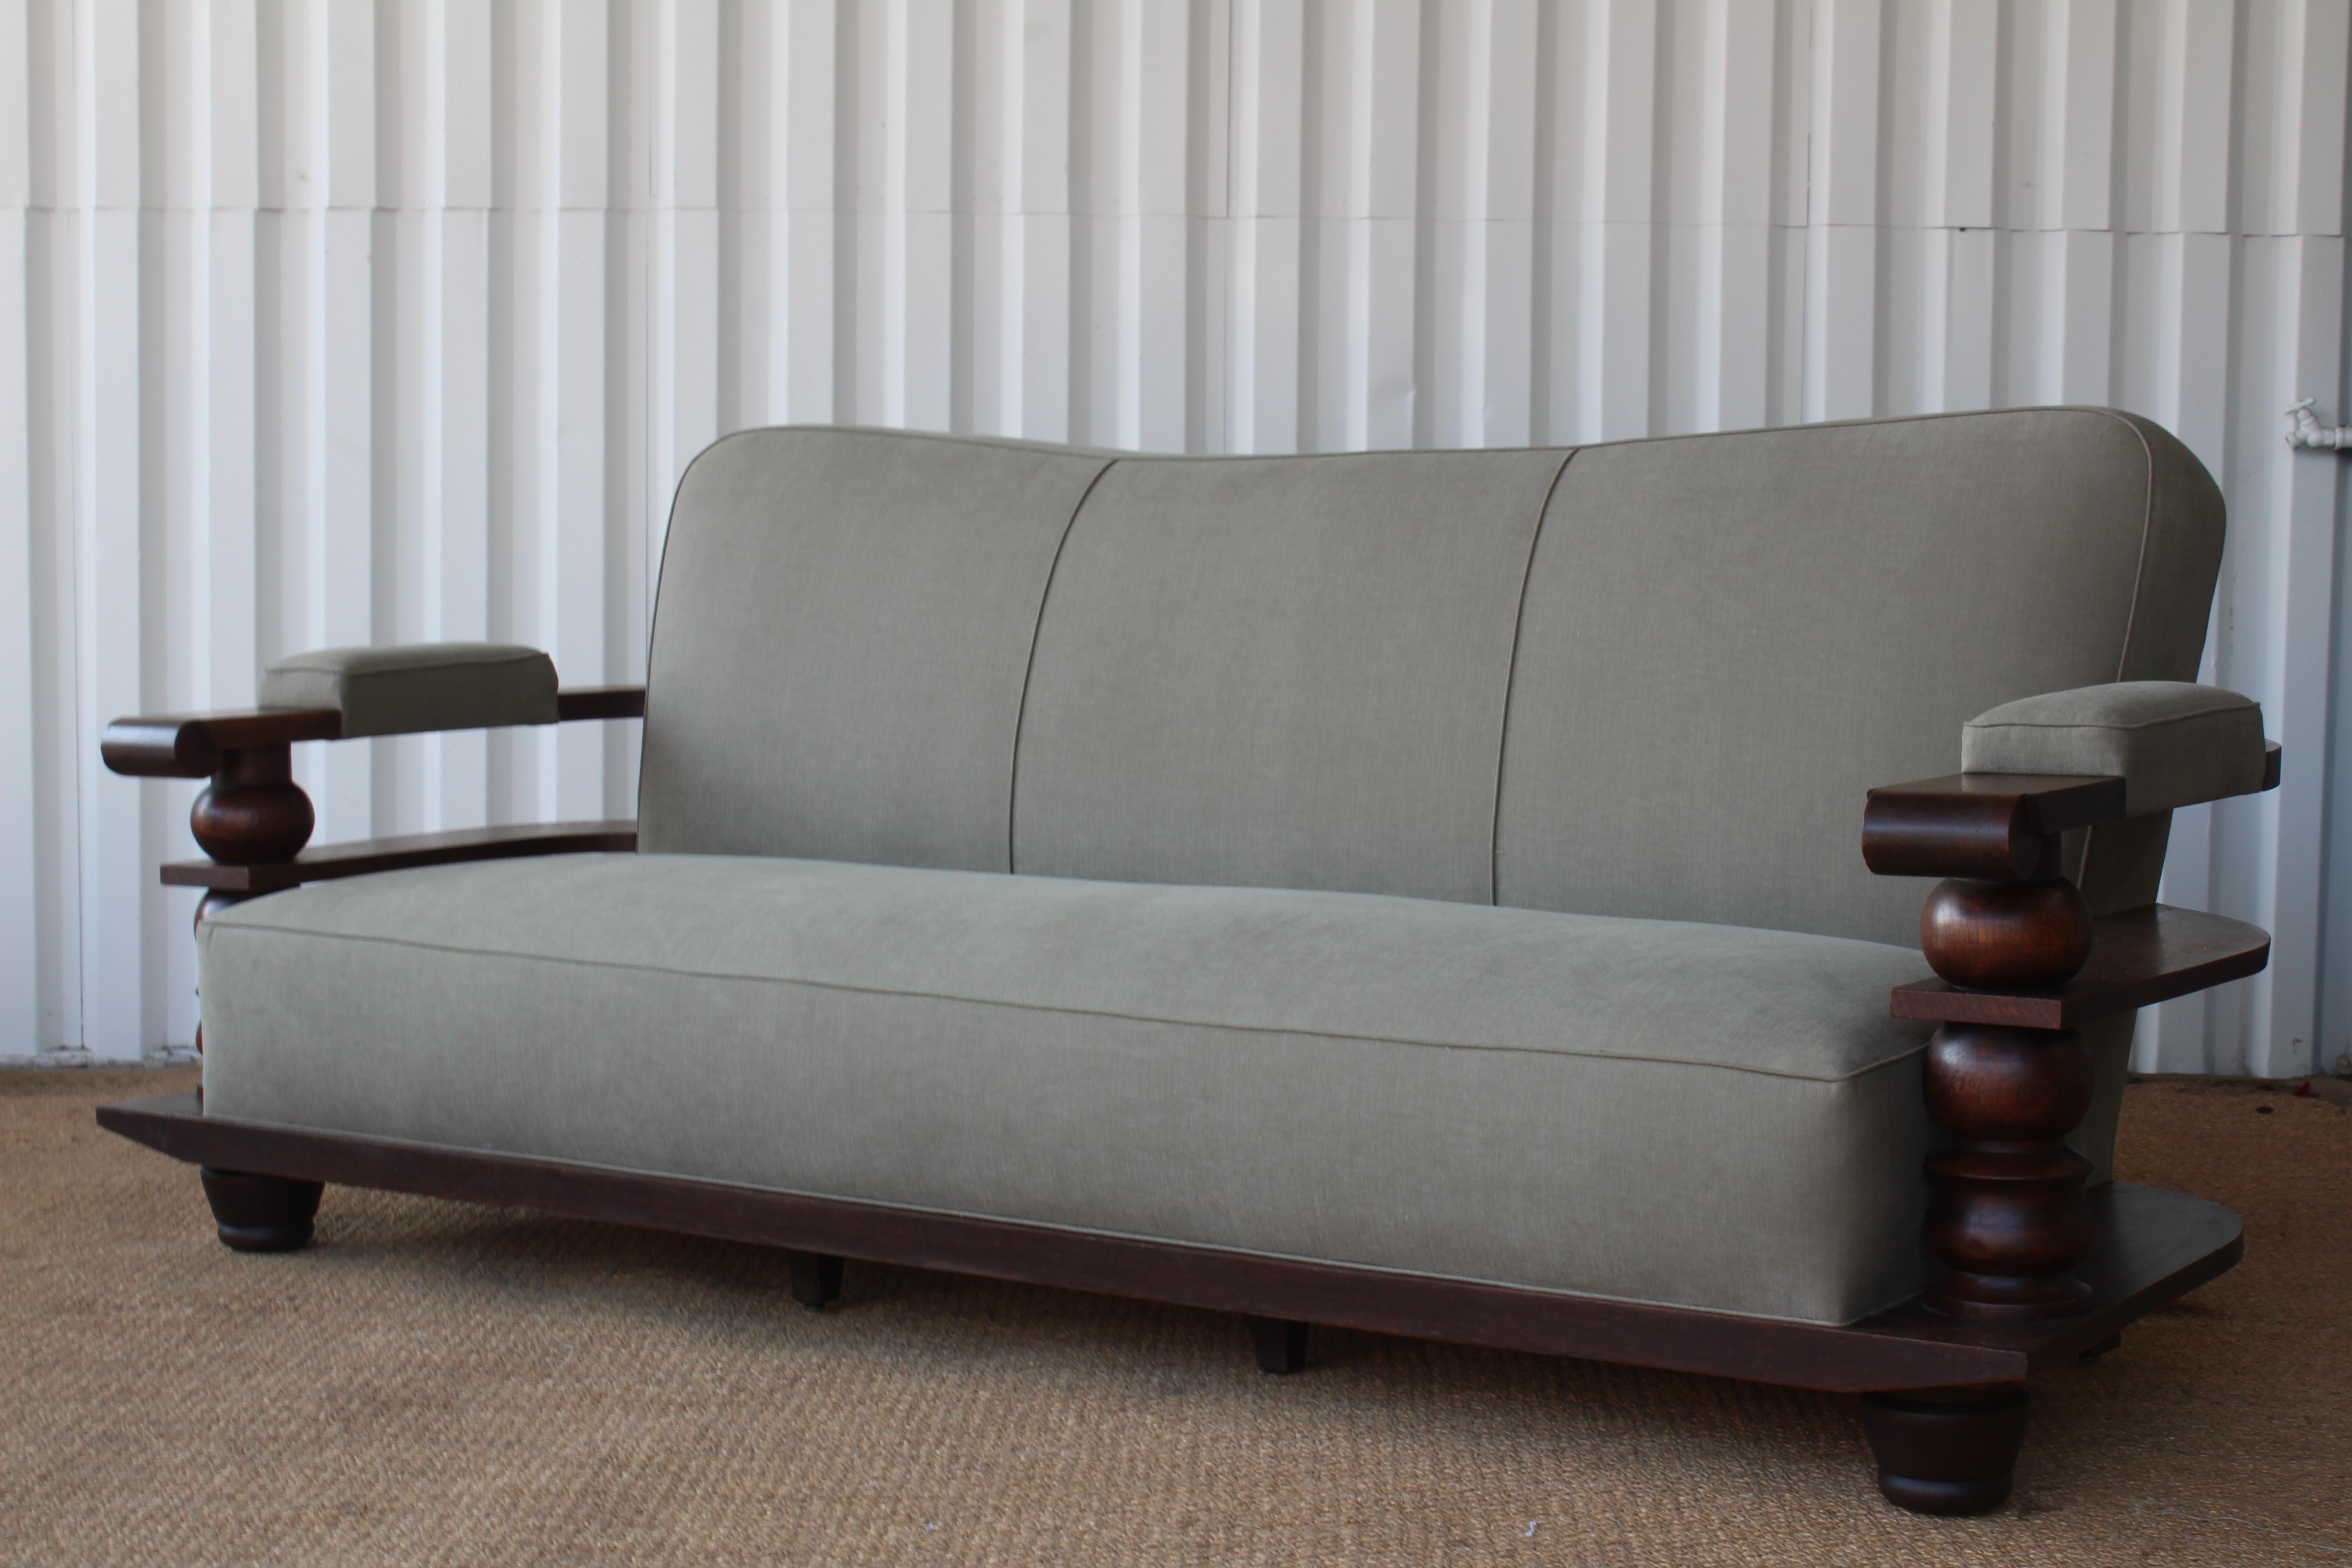 Oak framed 1930s sofa from a hotel in Biarritz, France. In the style of Charles Dudouyt. Newly reupholstered in a soft olive green linen.